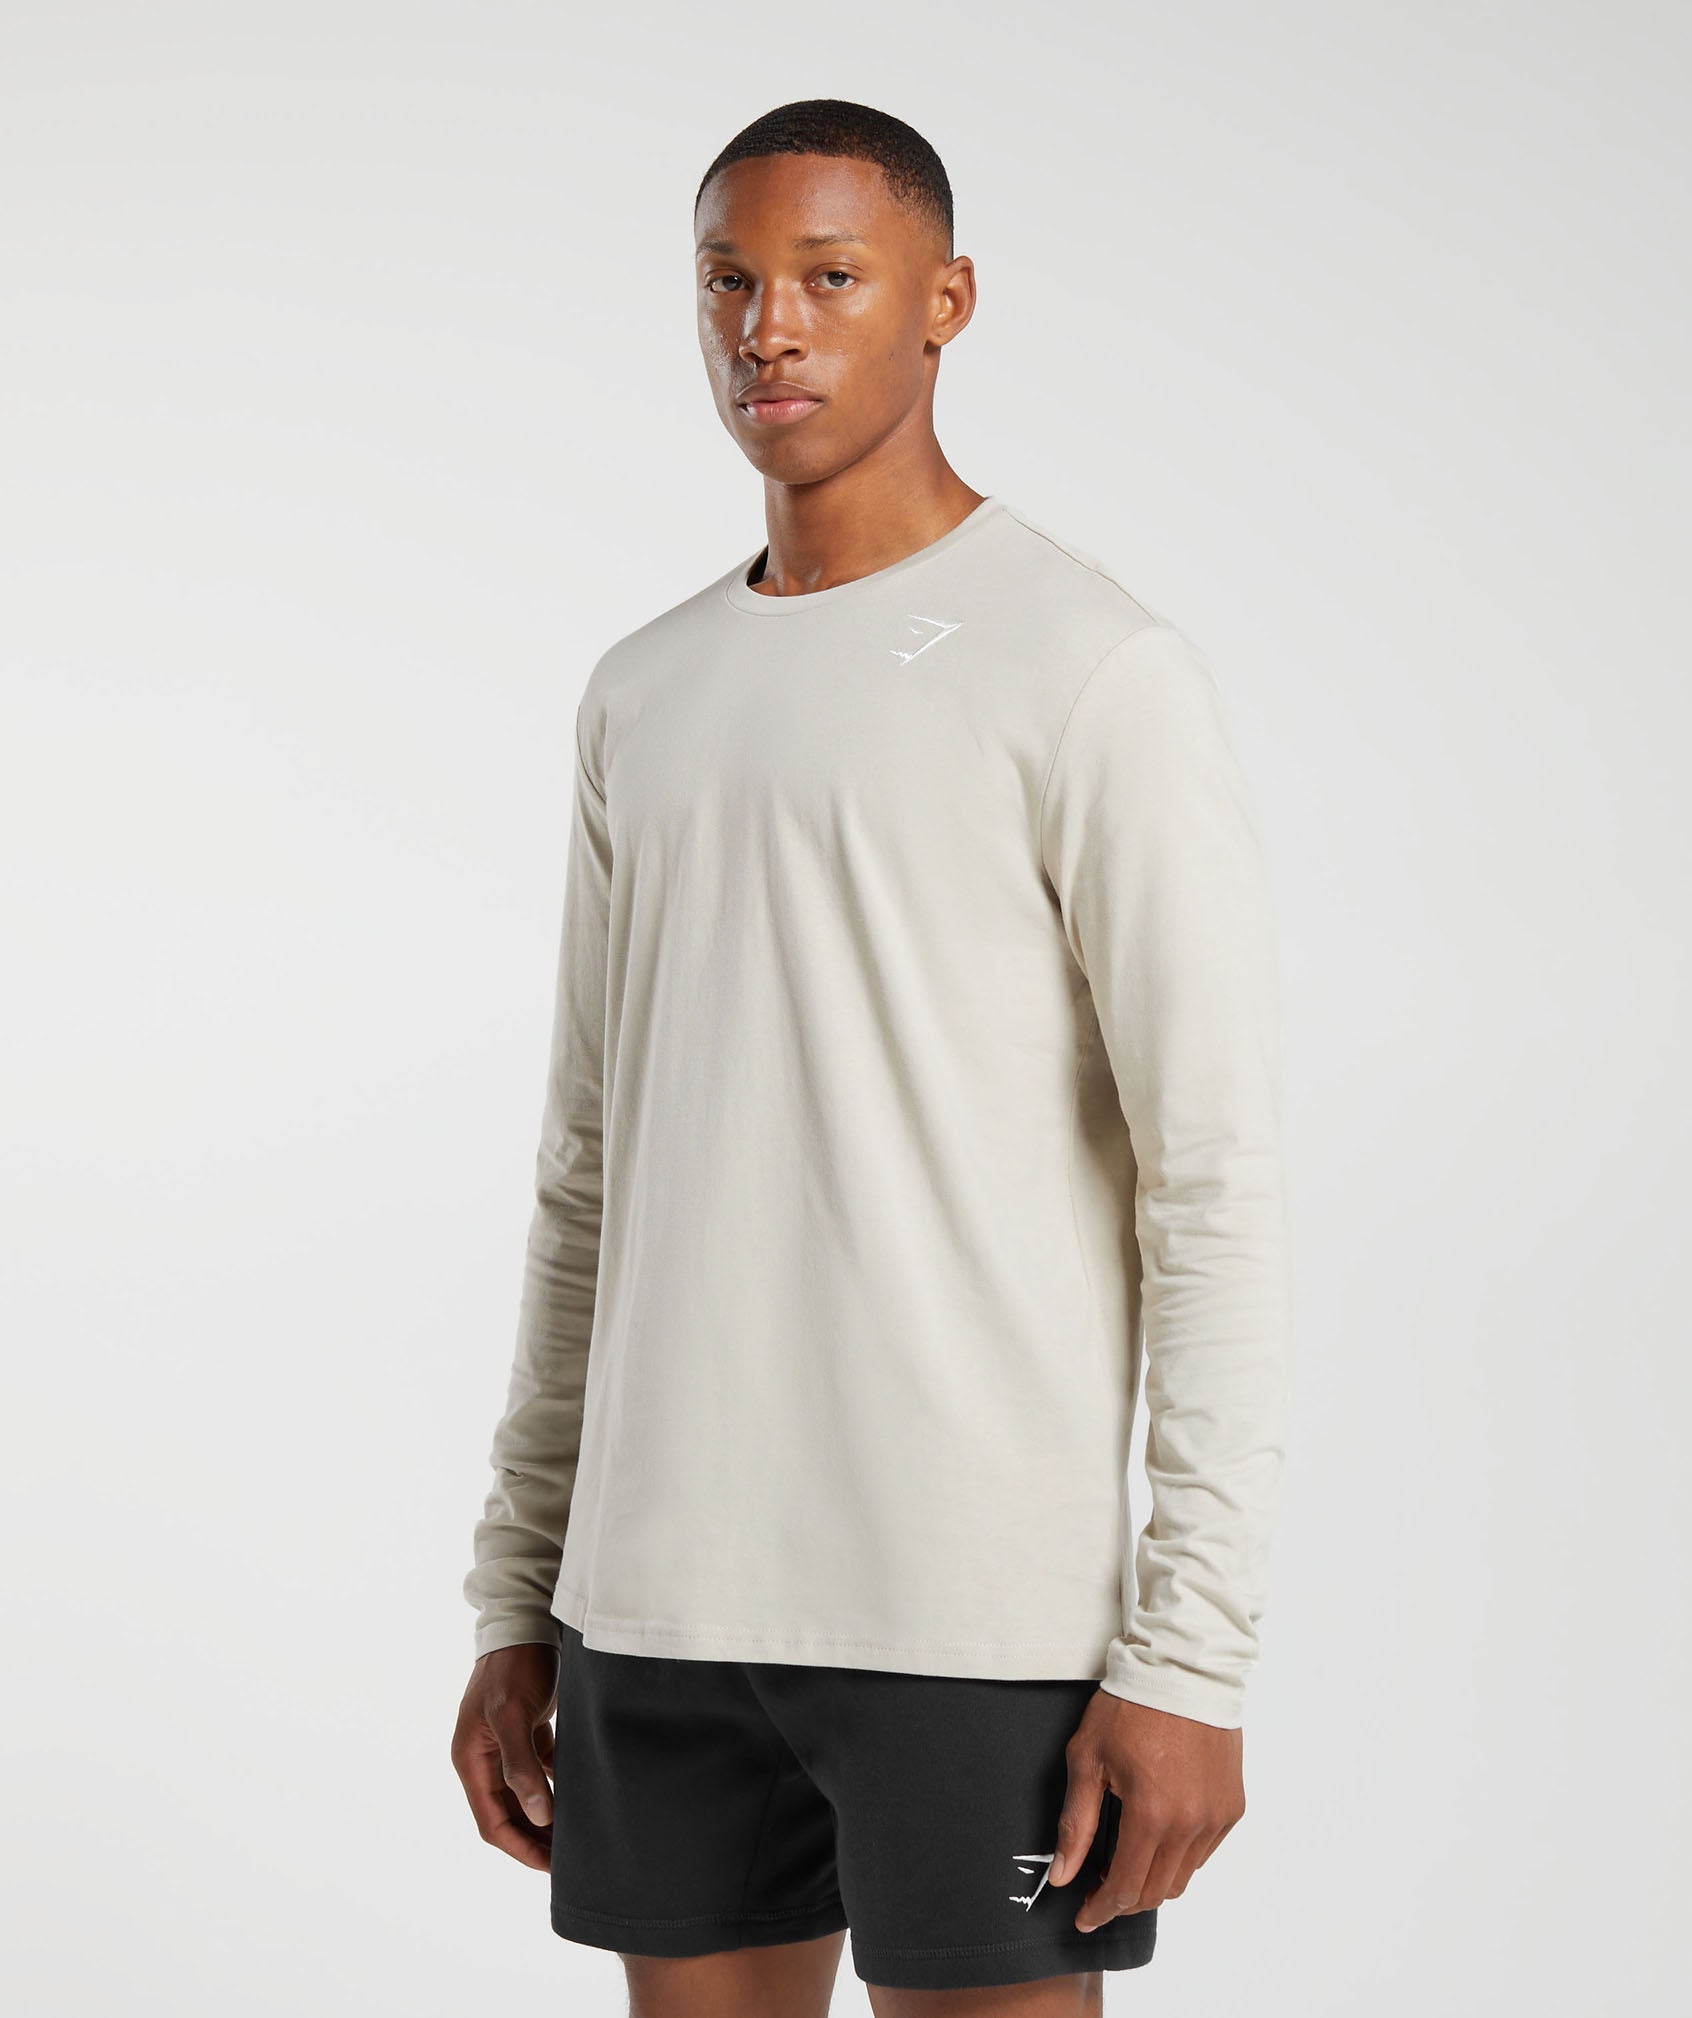 Crest Long Sleeve T-Shirt in Pebble Grey